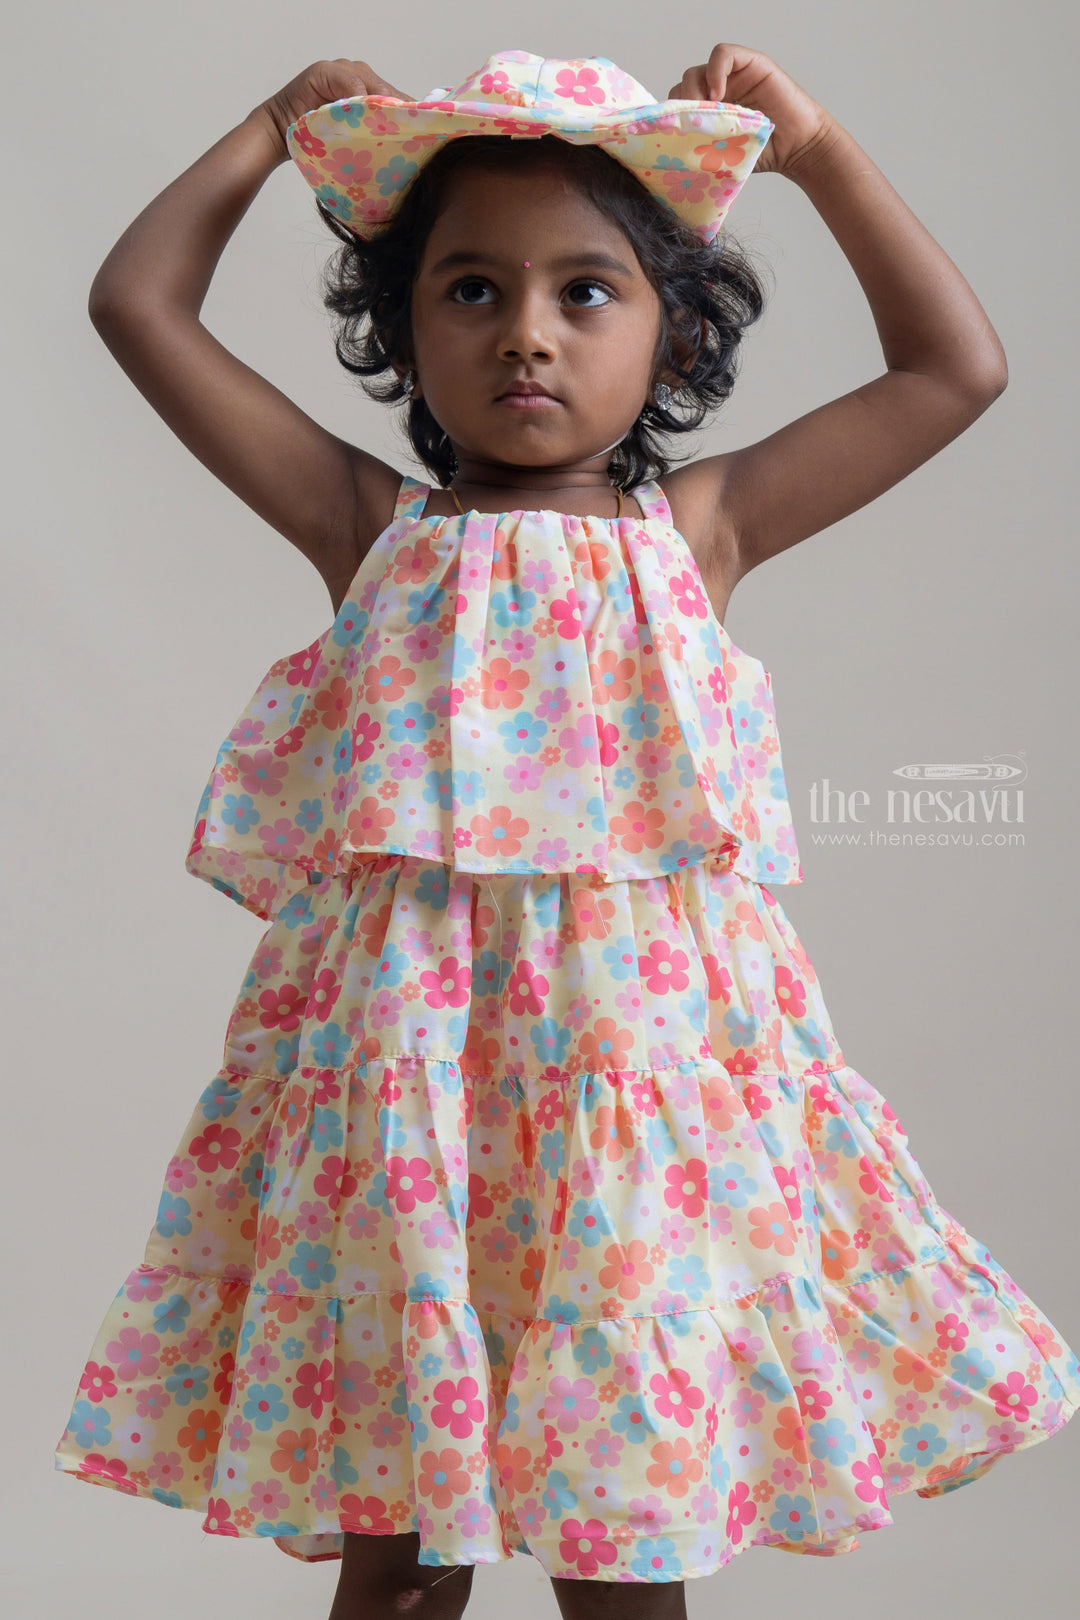 The Nesavu Baby Fancy Frock Gorgeous Multi Colour Floral Printed Sleeveless Baby Frock With Cap Nesavu Printed Floral Dress For Baby Girls | Floral Printed Frocks | The Nesavu